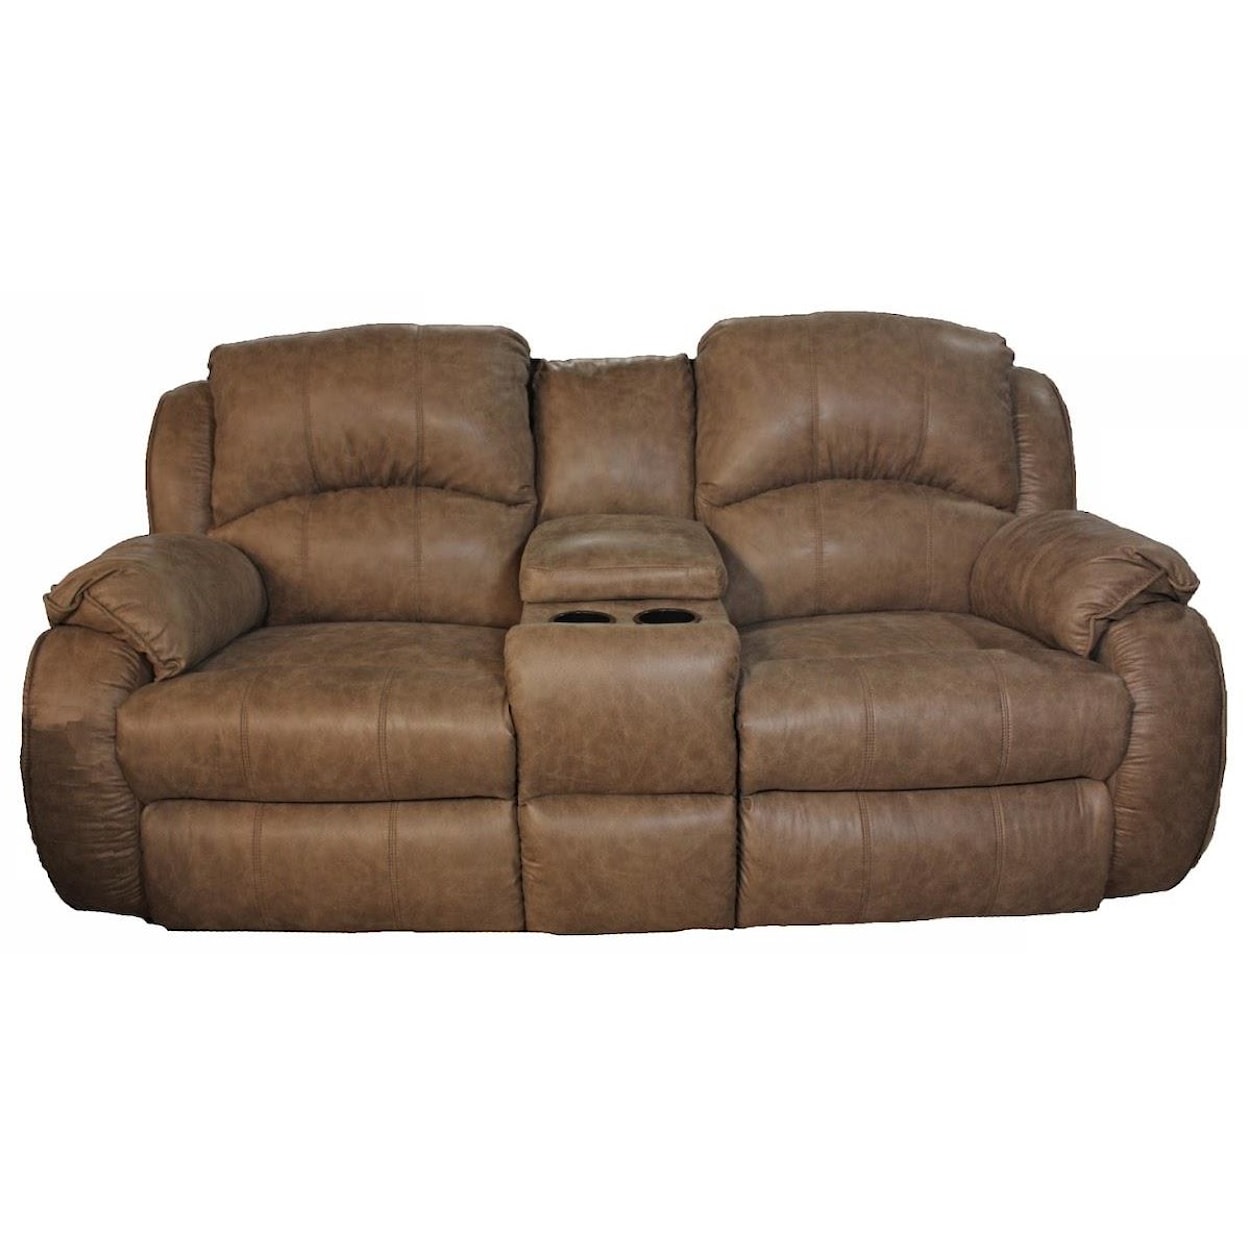 Southern Motion CAGNEY Power Reclining Loveseat